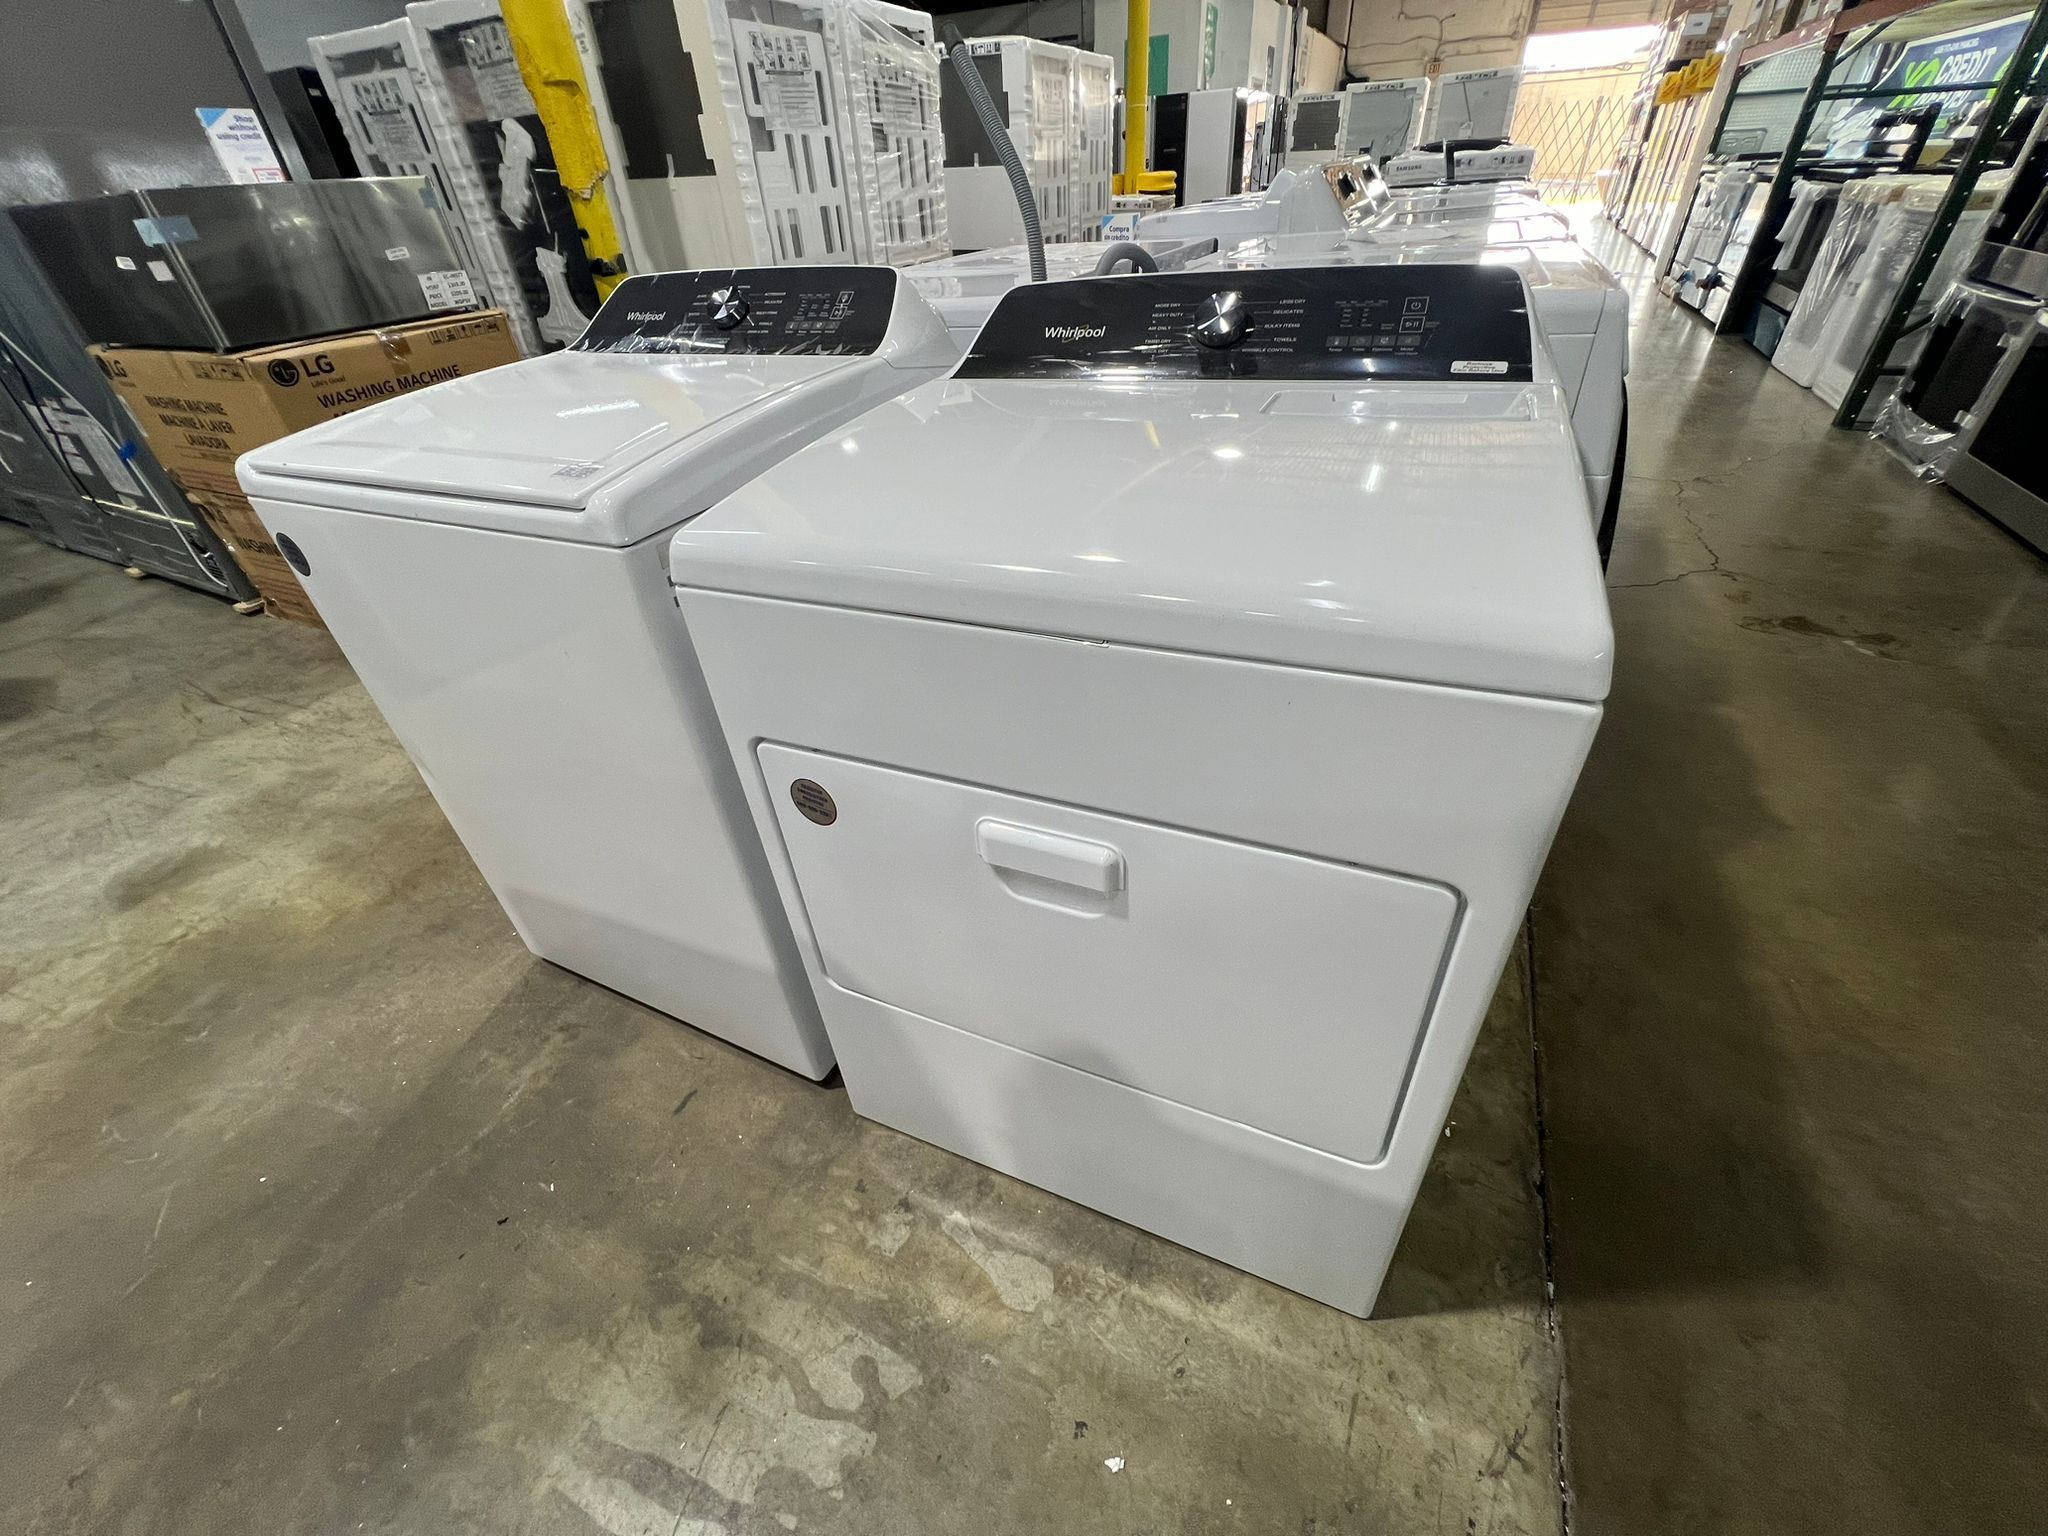 Whirlpool  - 4.6 Cu. Ft. Top Load Washer with Built-In Water Faucet and 7 Cu. Ft. Electric Dryer with Moisture Sensing